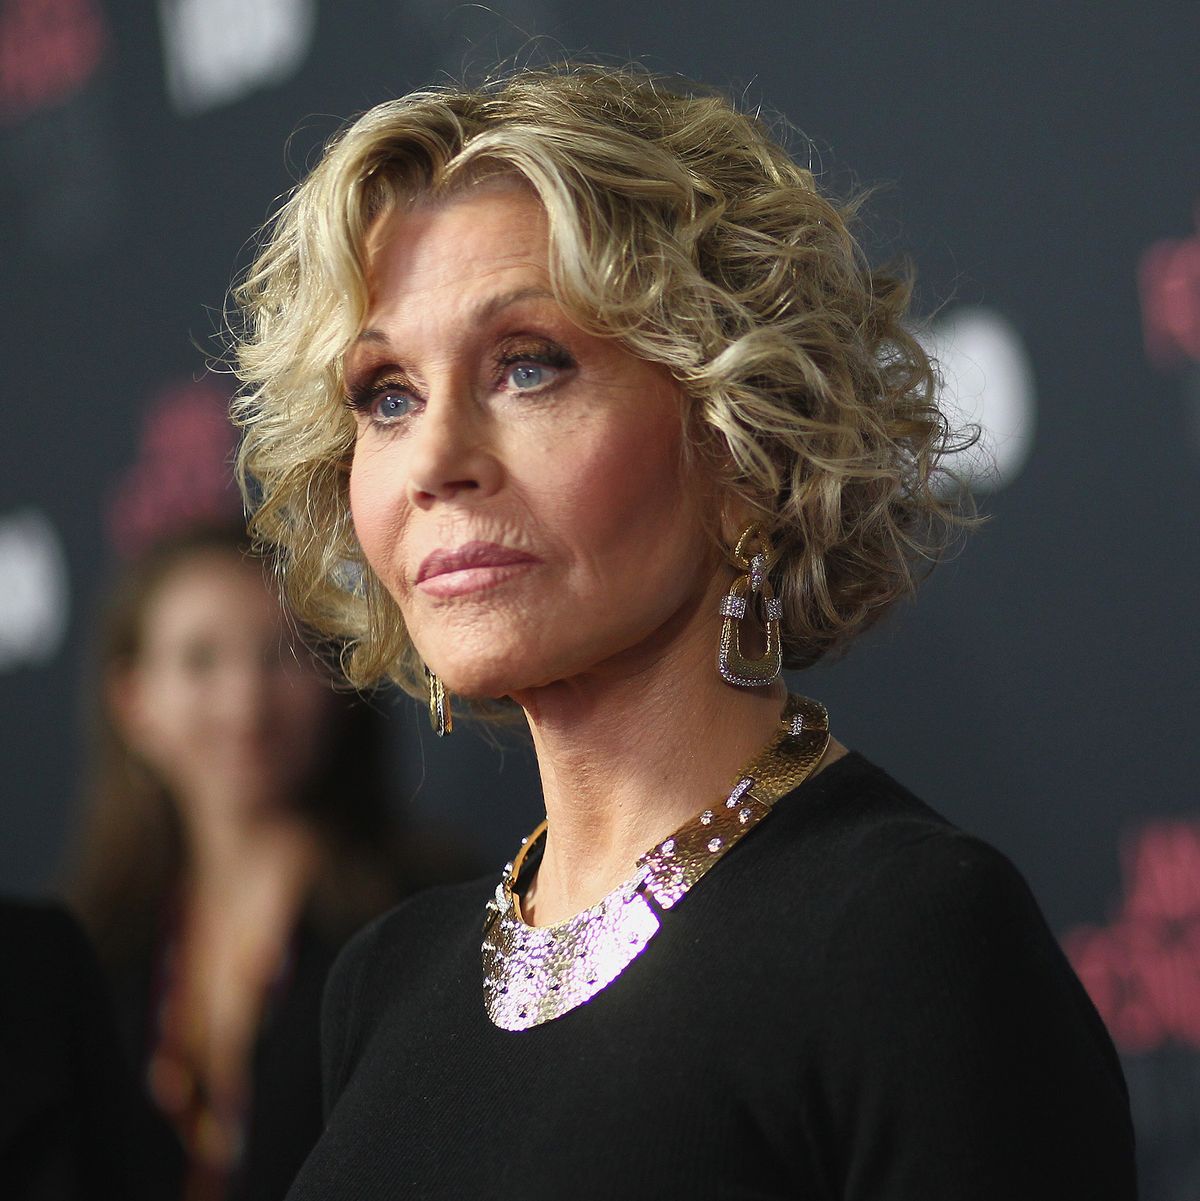 Premiere Of HBO's 'Jane Fonda In Five Acts' - Arrivals